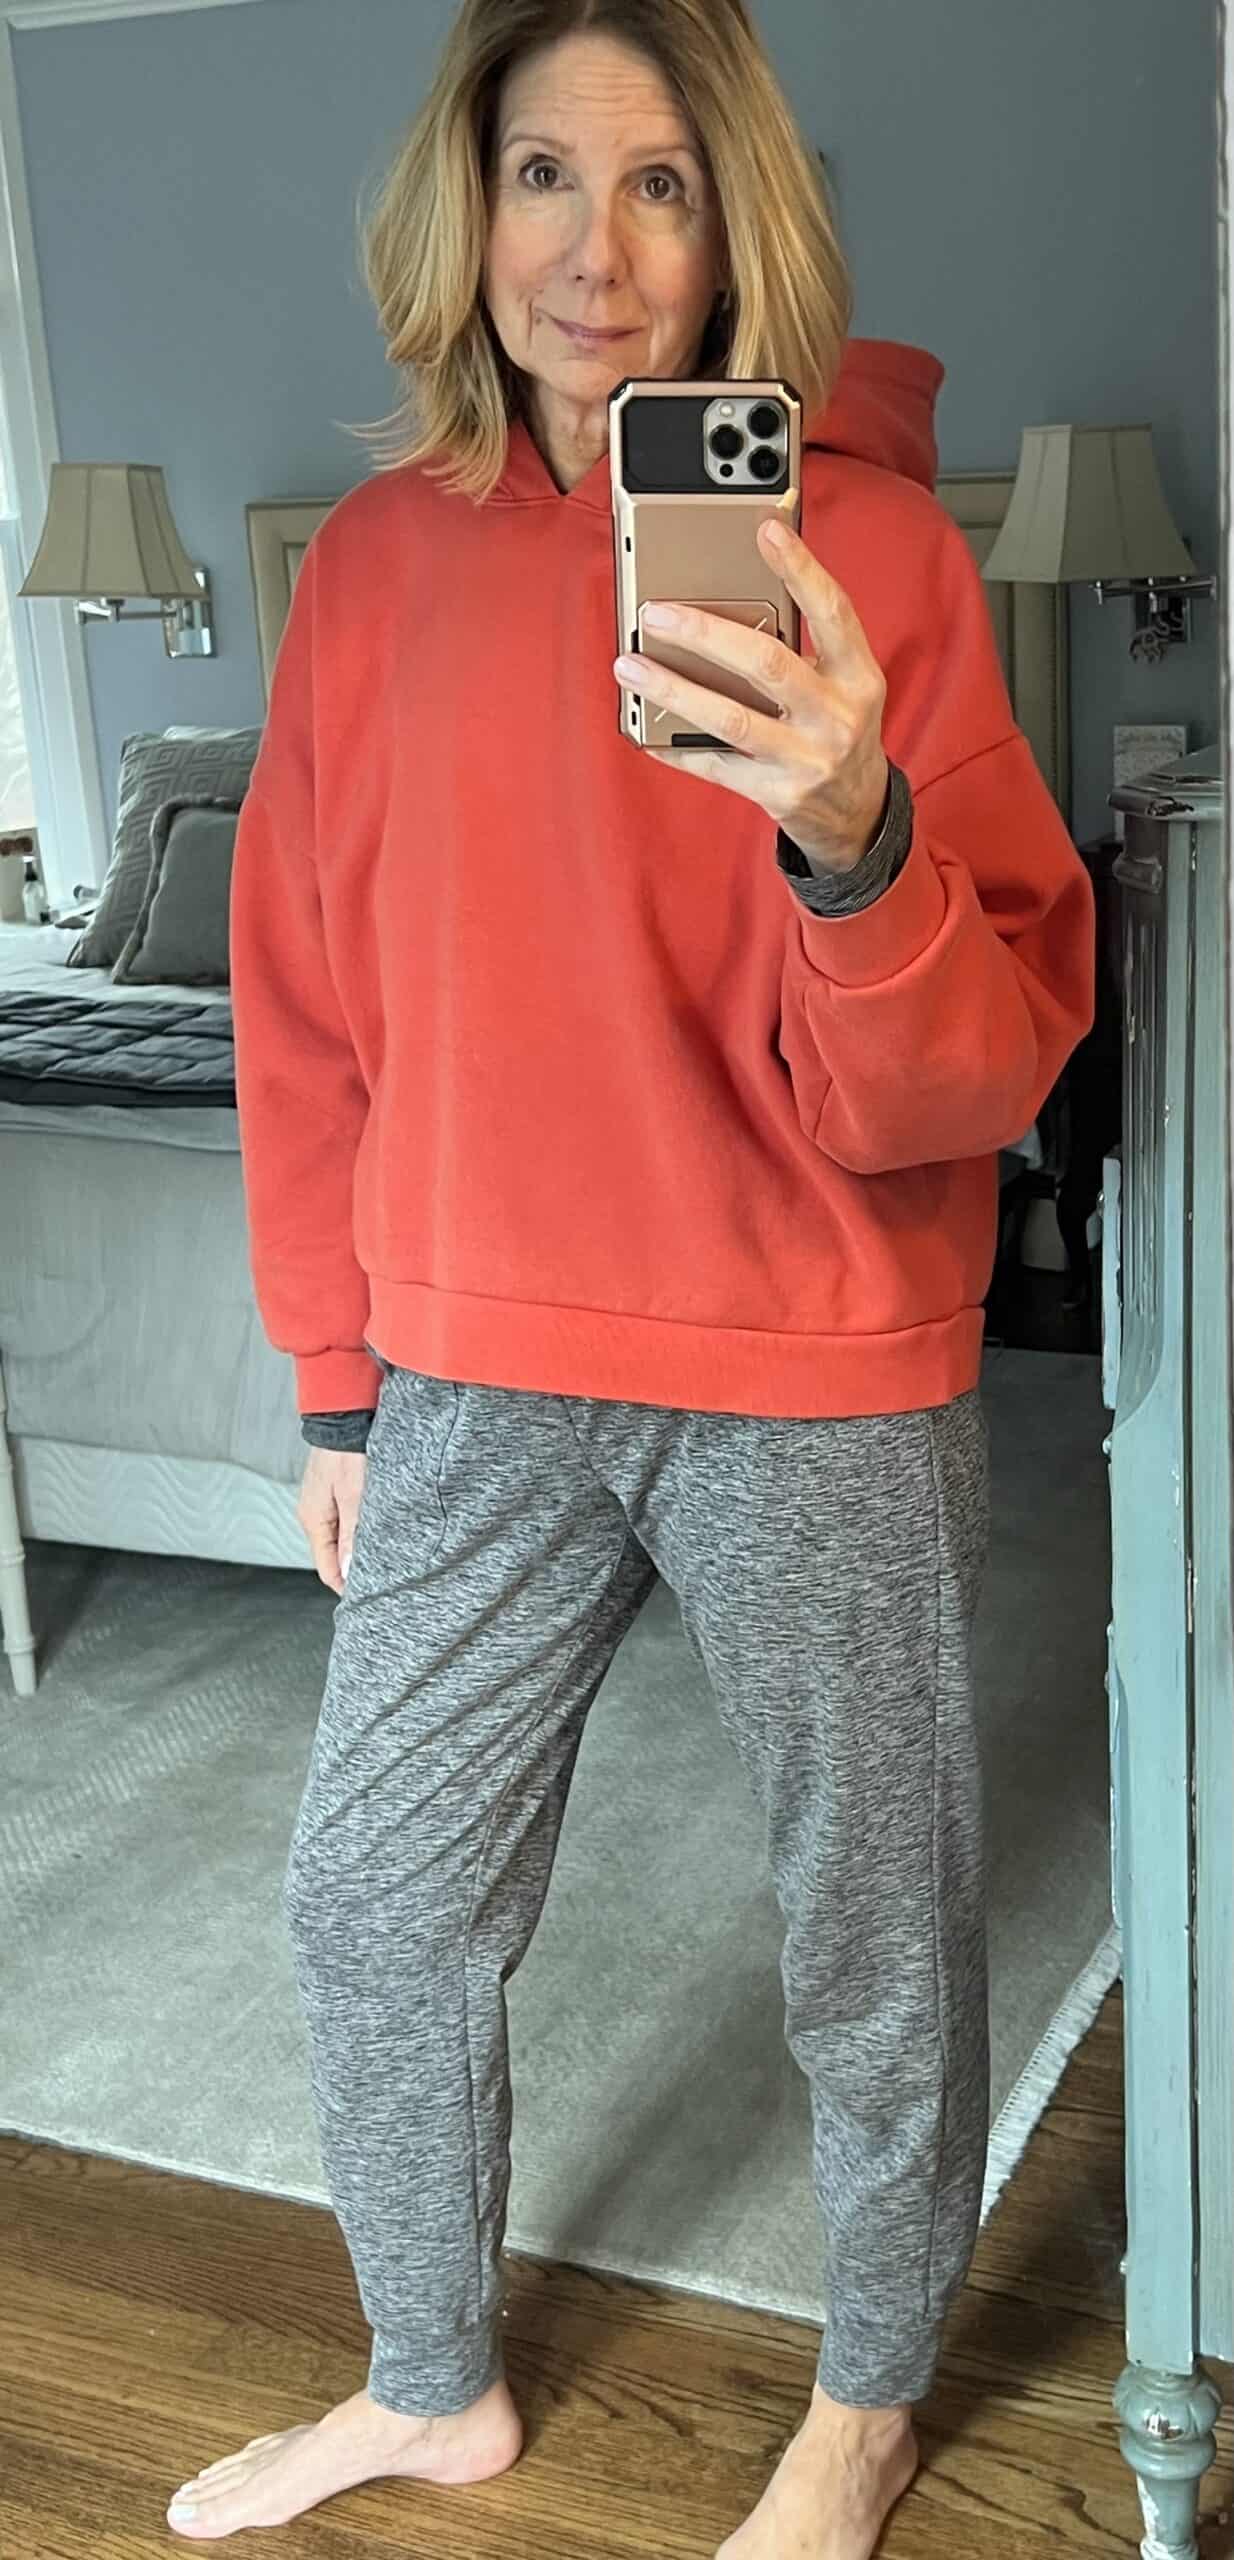 woman in a red hooded sweatshirt and grey sweatpants